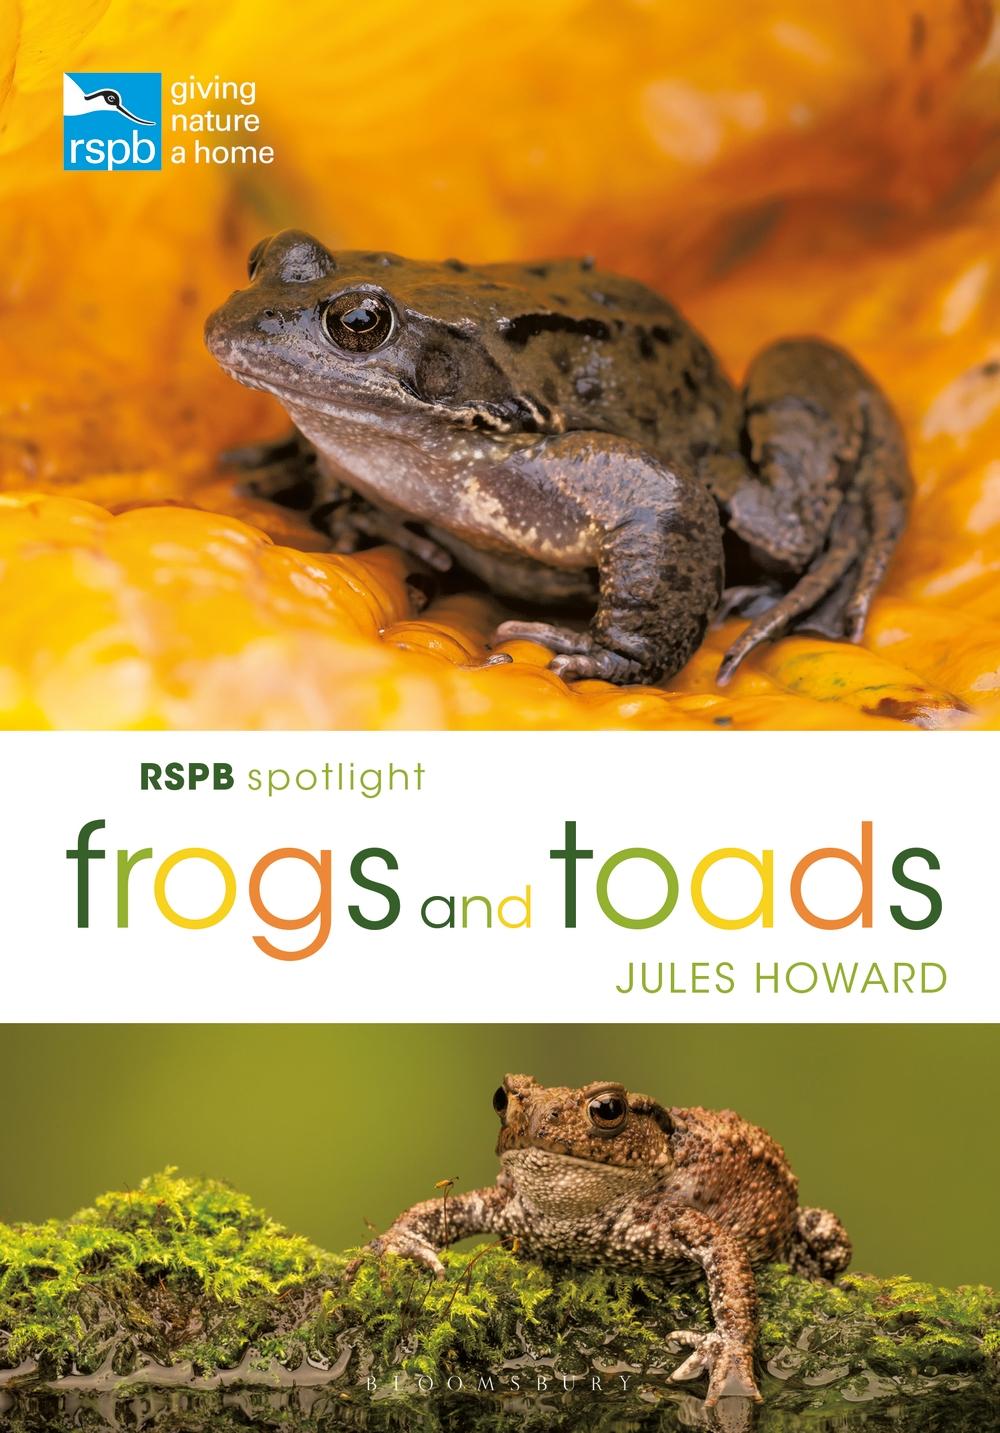 RSPB Spotlight Frogs and Toads - Jules Howard